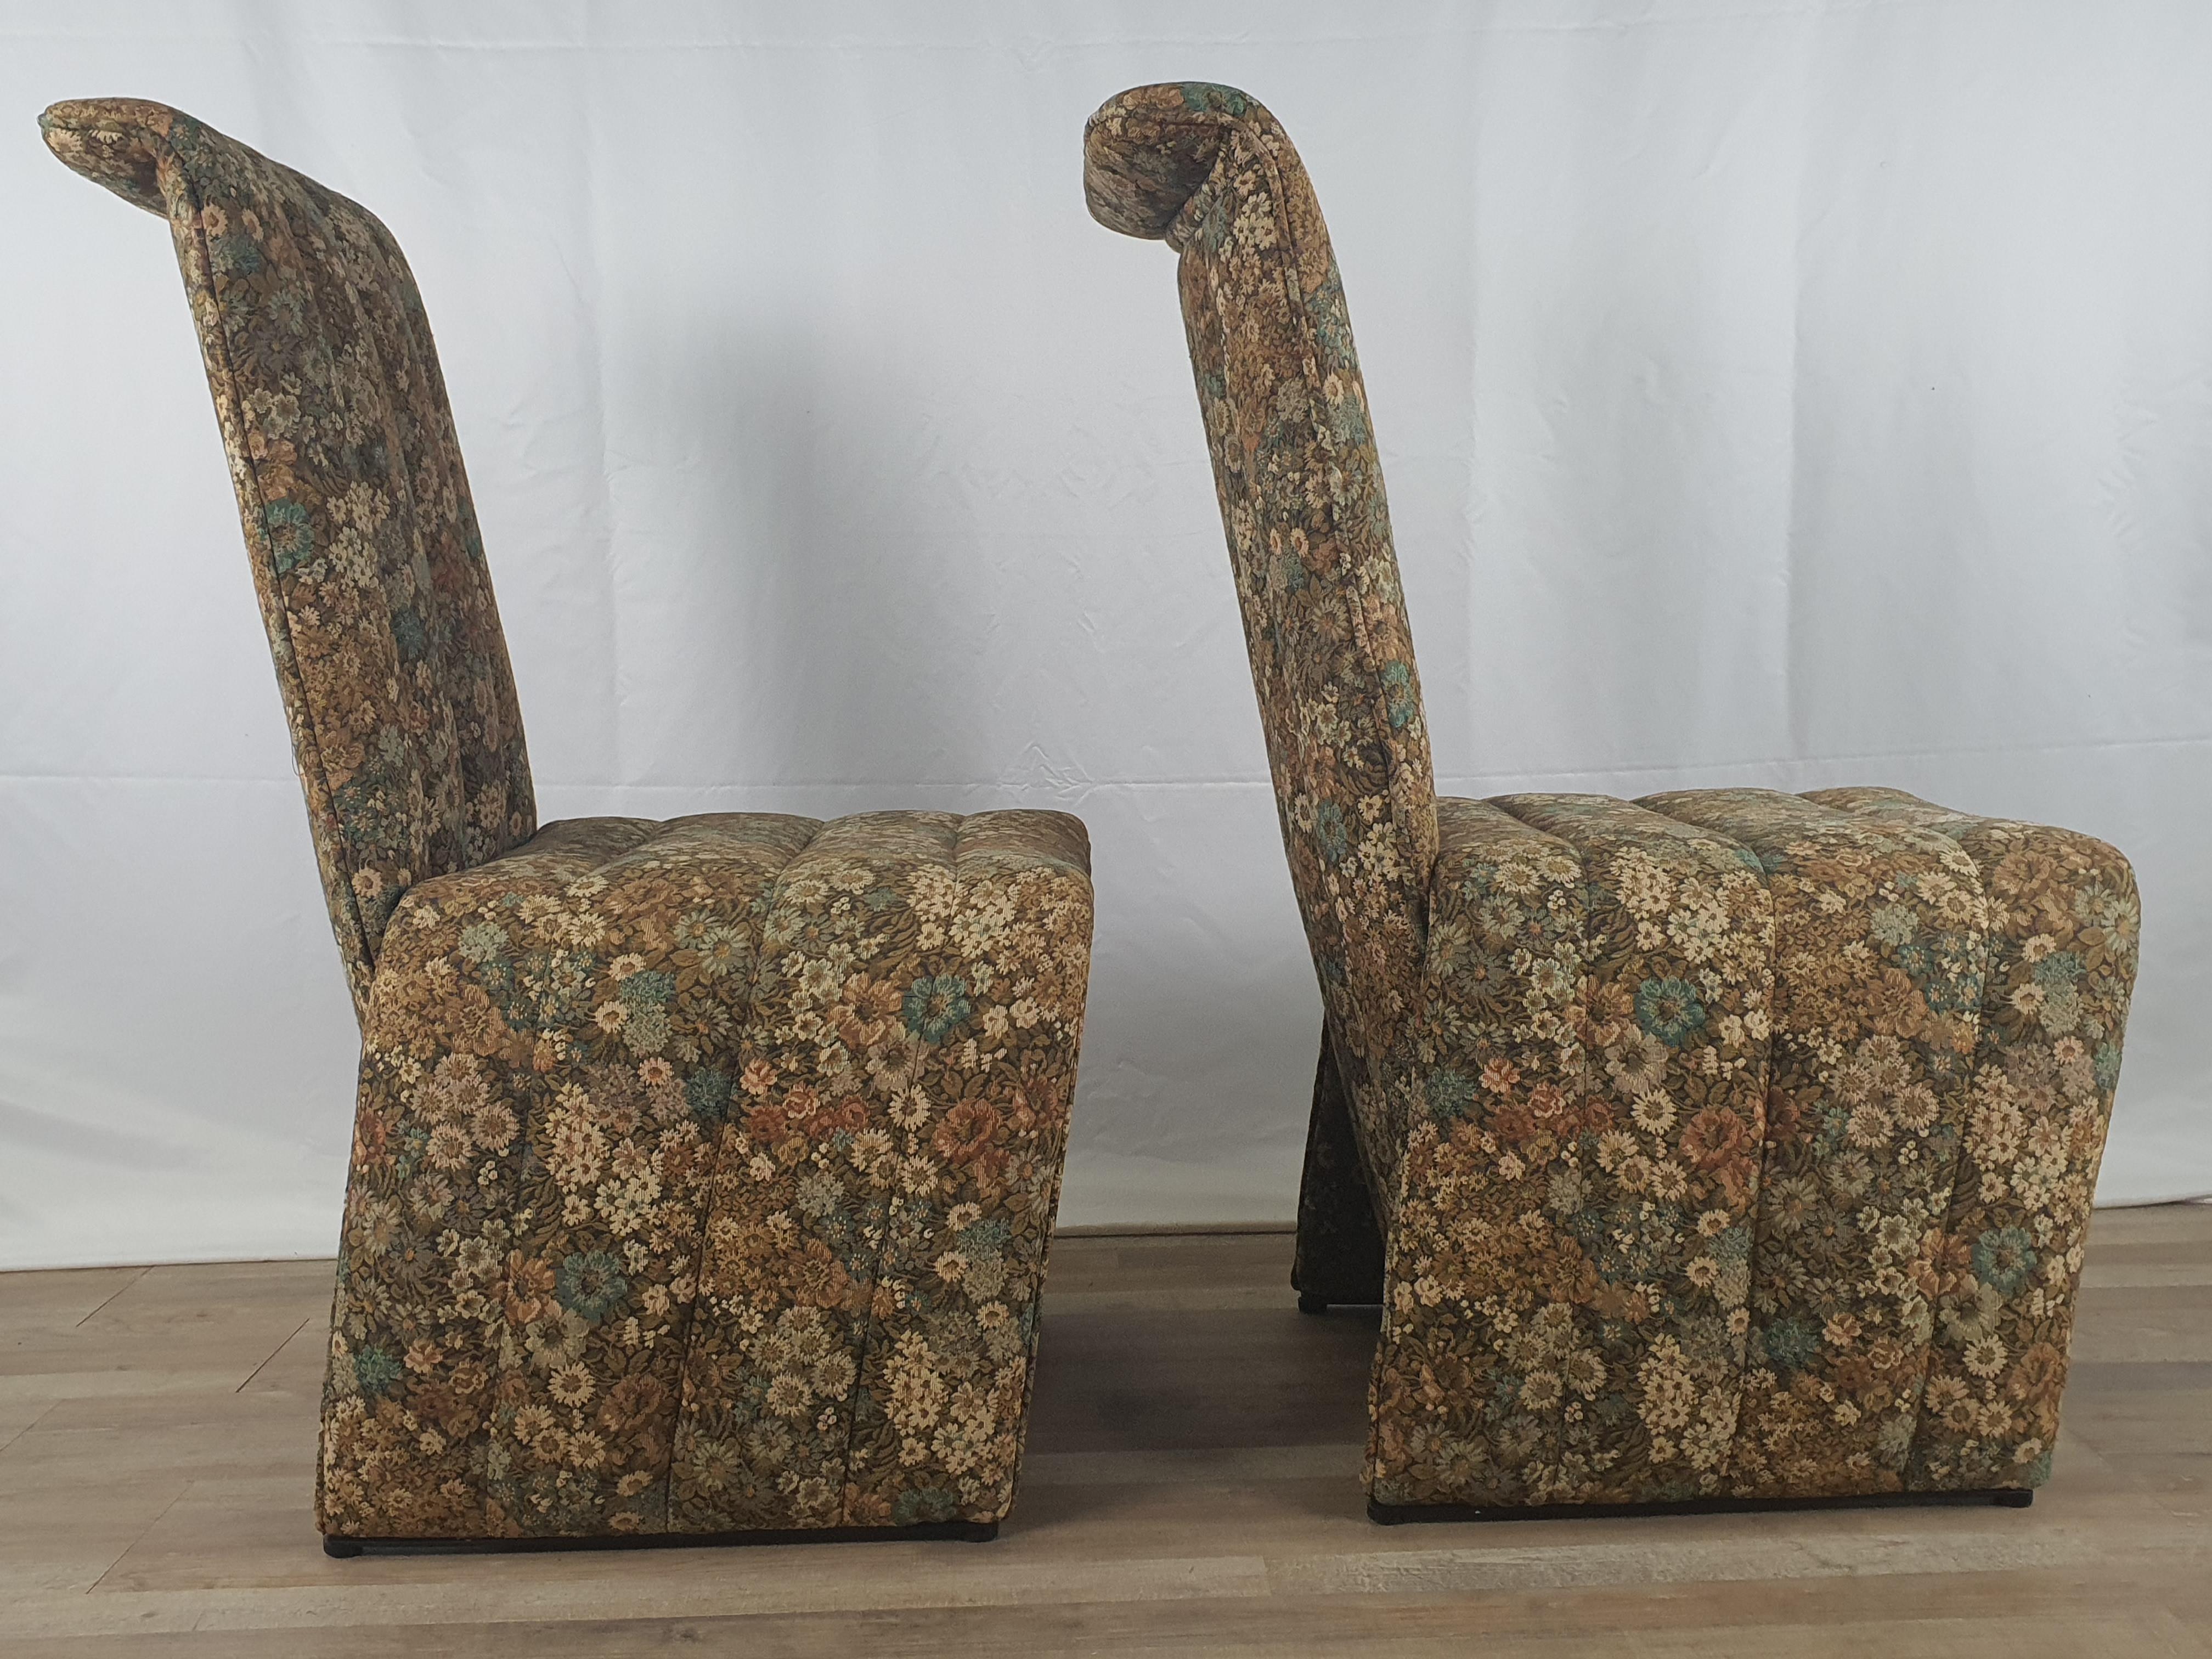 Pair of very special chairs from the early 1970s, probably made in Northern Italy.

Note the curved line of the seats and backrest, all upholstered in floral fabric and rigid black feet.

An unknown designer, however, one can guess the touch of